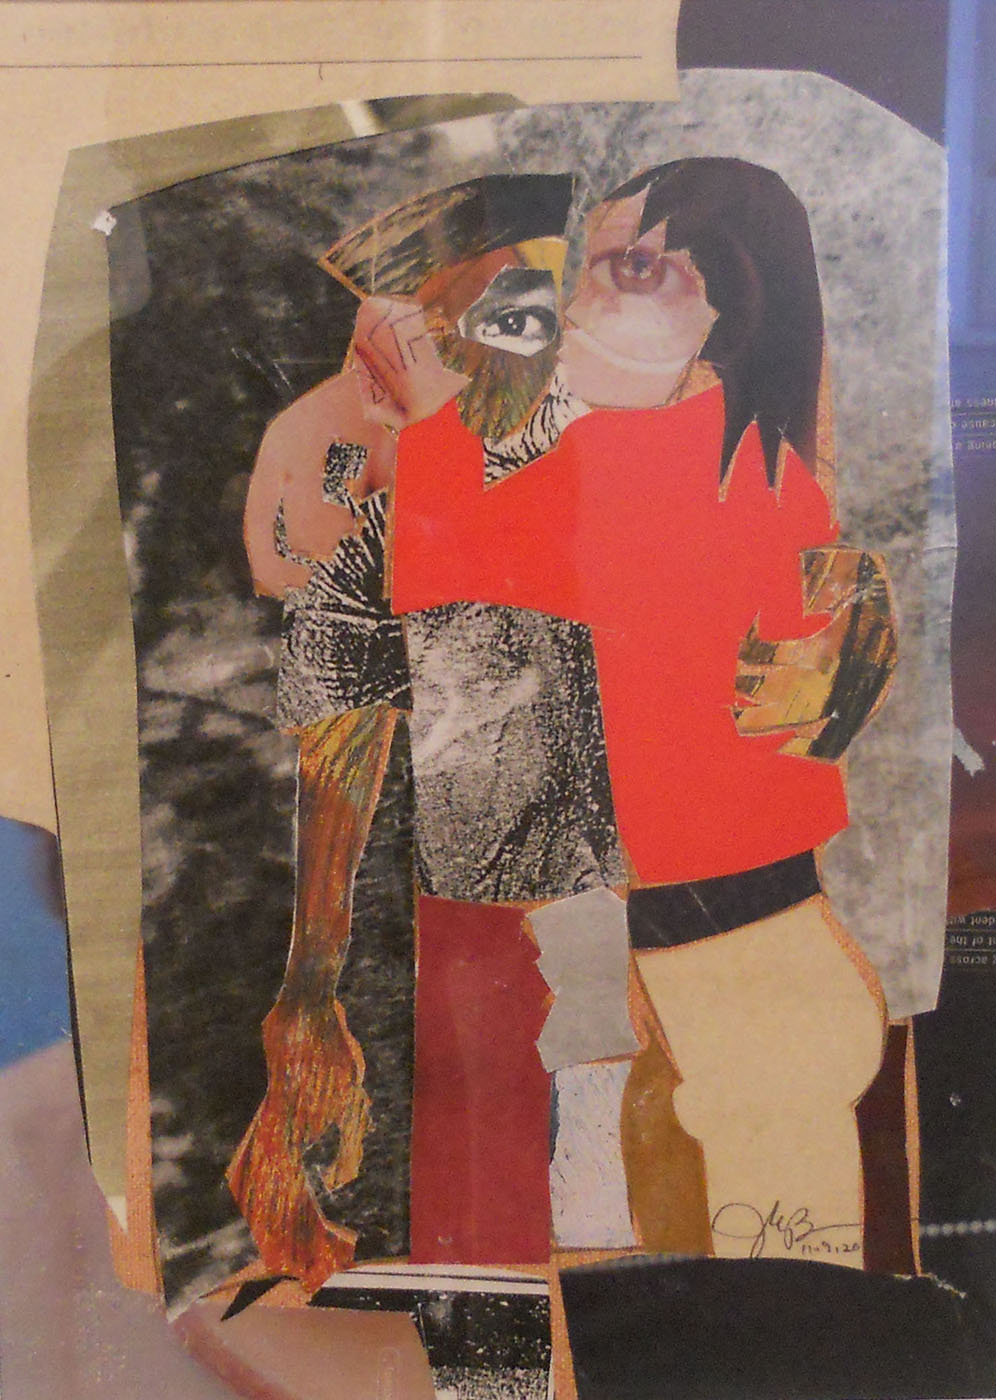 Seduction by Jerry Butler. Mixed media collage on art board, 13 x 15, 2003.